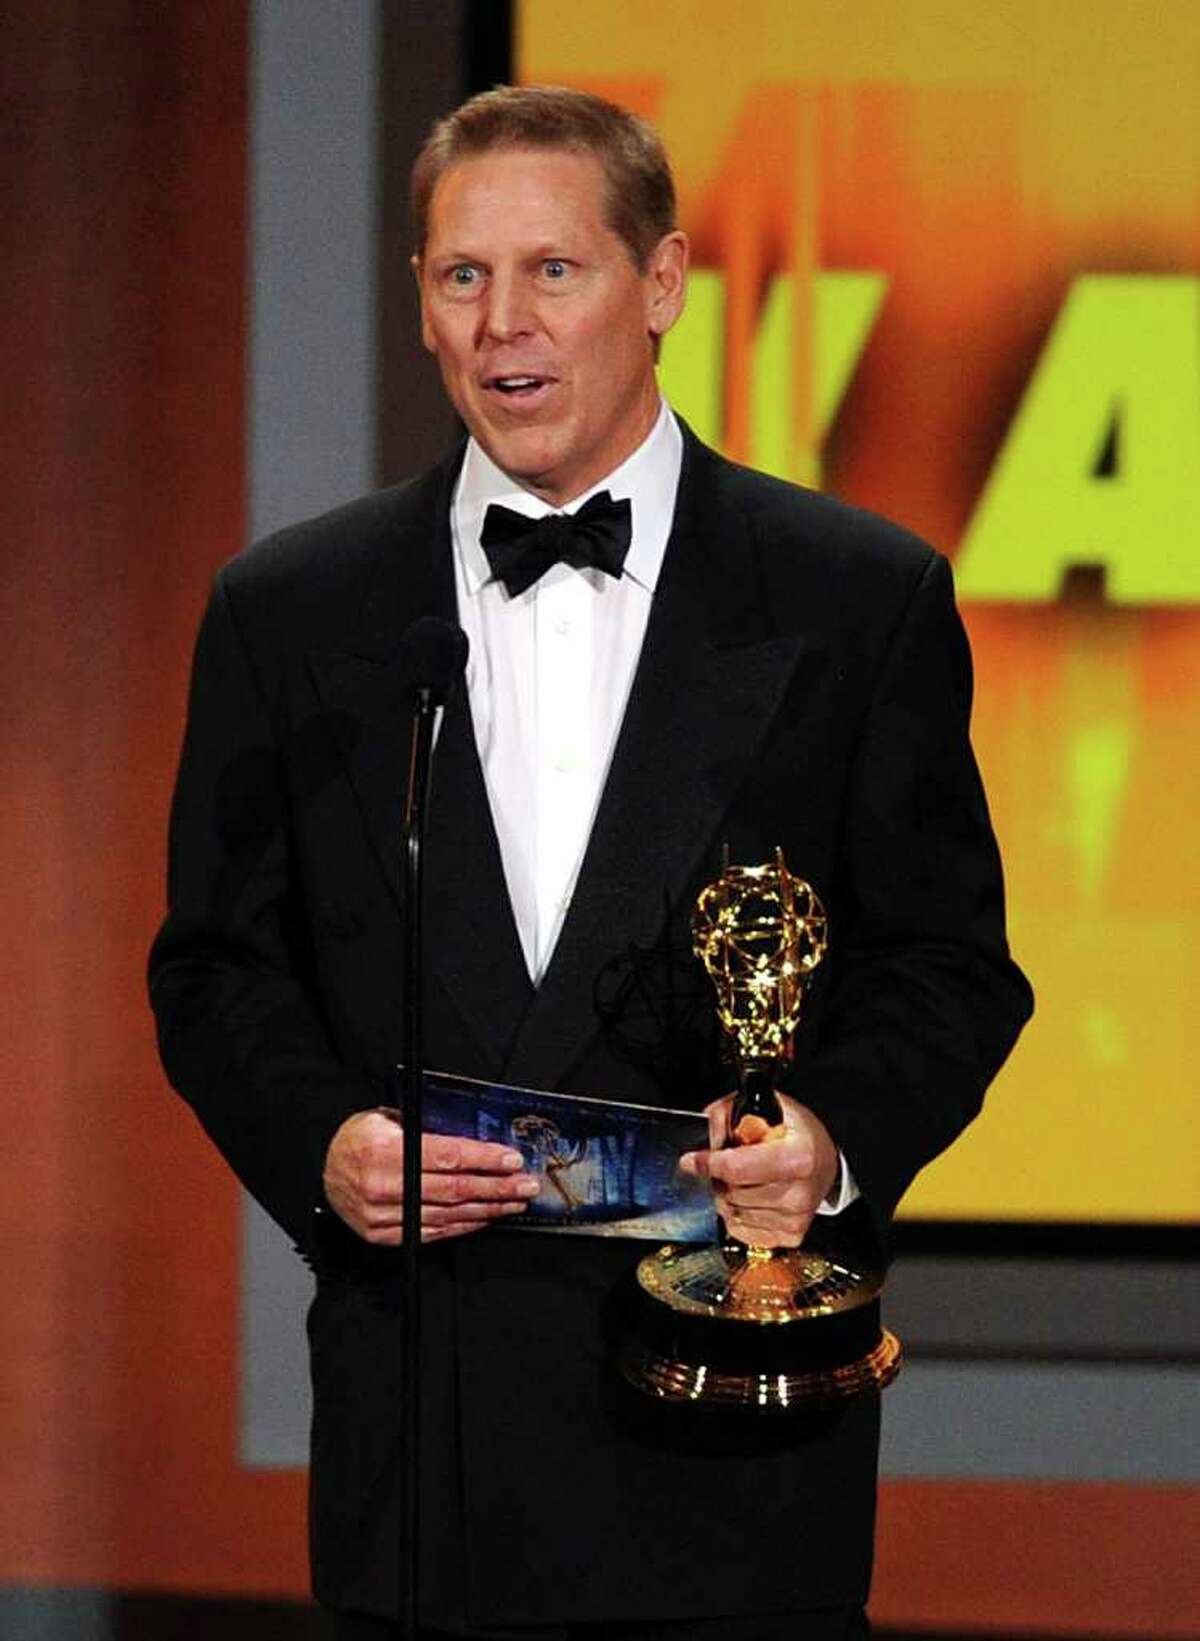 Wilton resident Bucky Gunts accepts the Outstanding Directing for a Variety, Music, or Comedy Special award onstage at the 62nd Annual Primetime Emmy Awards held at the Nokia Theatre L.A. Live on August 29, 2010 in Los Angeles, California.